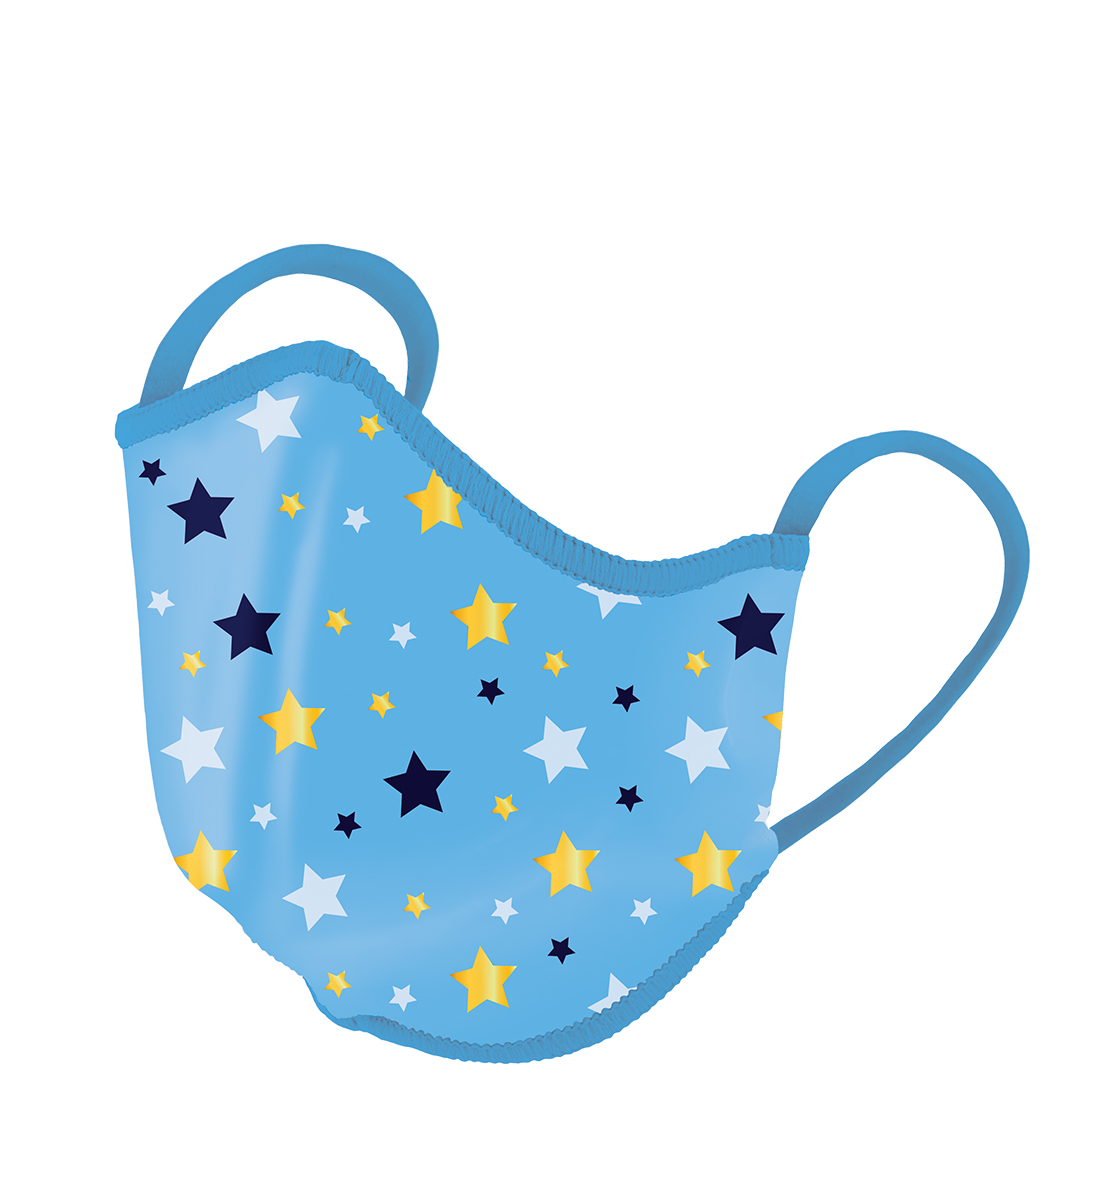 Reusable Face mask with BacLock®, kids blue/yellow stars